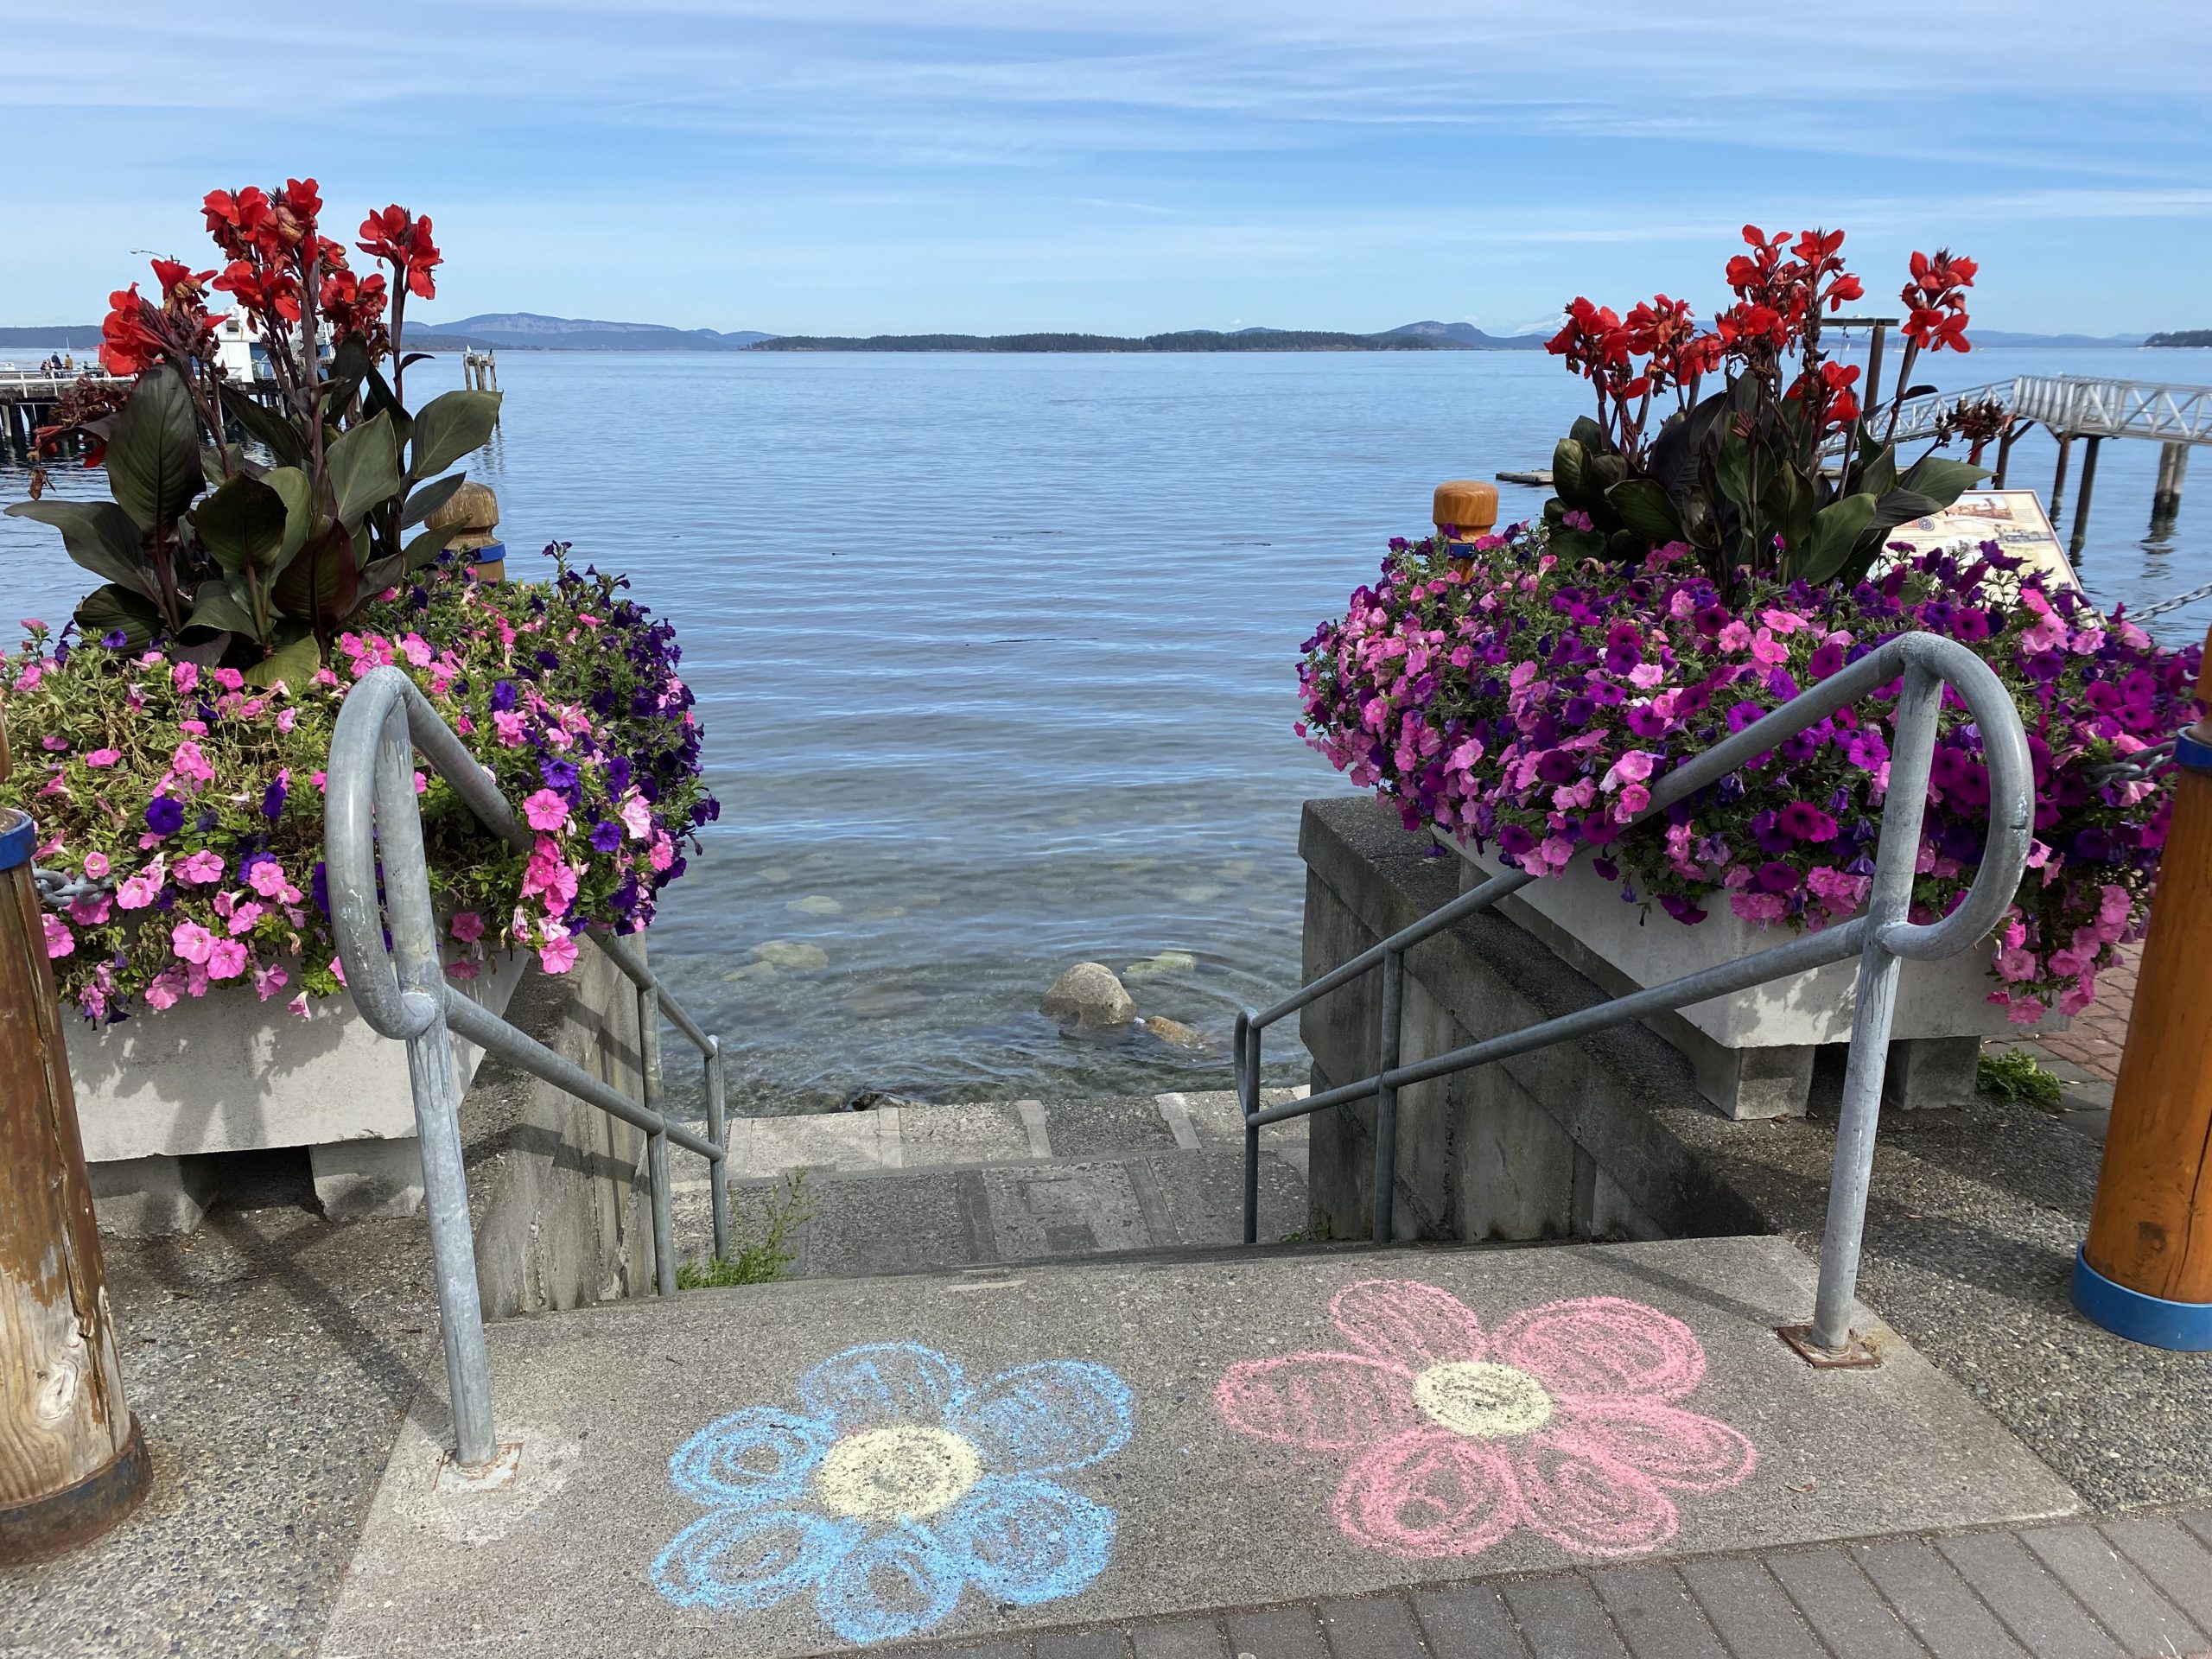 Image of the top of the stairway that leads down to Glass Beach, with planters full of pink, purple and red flowers, two flowers drawn in chalk on the sidewalk above, and blue sky and sea in the background